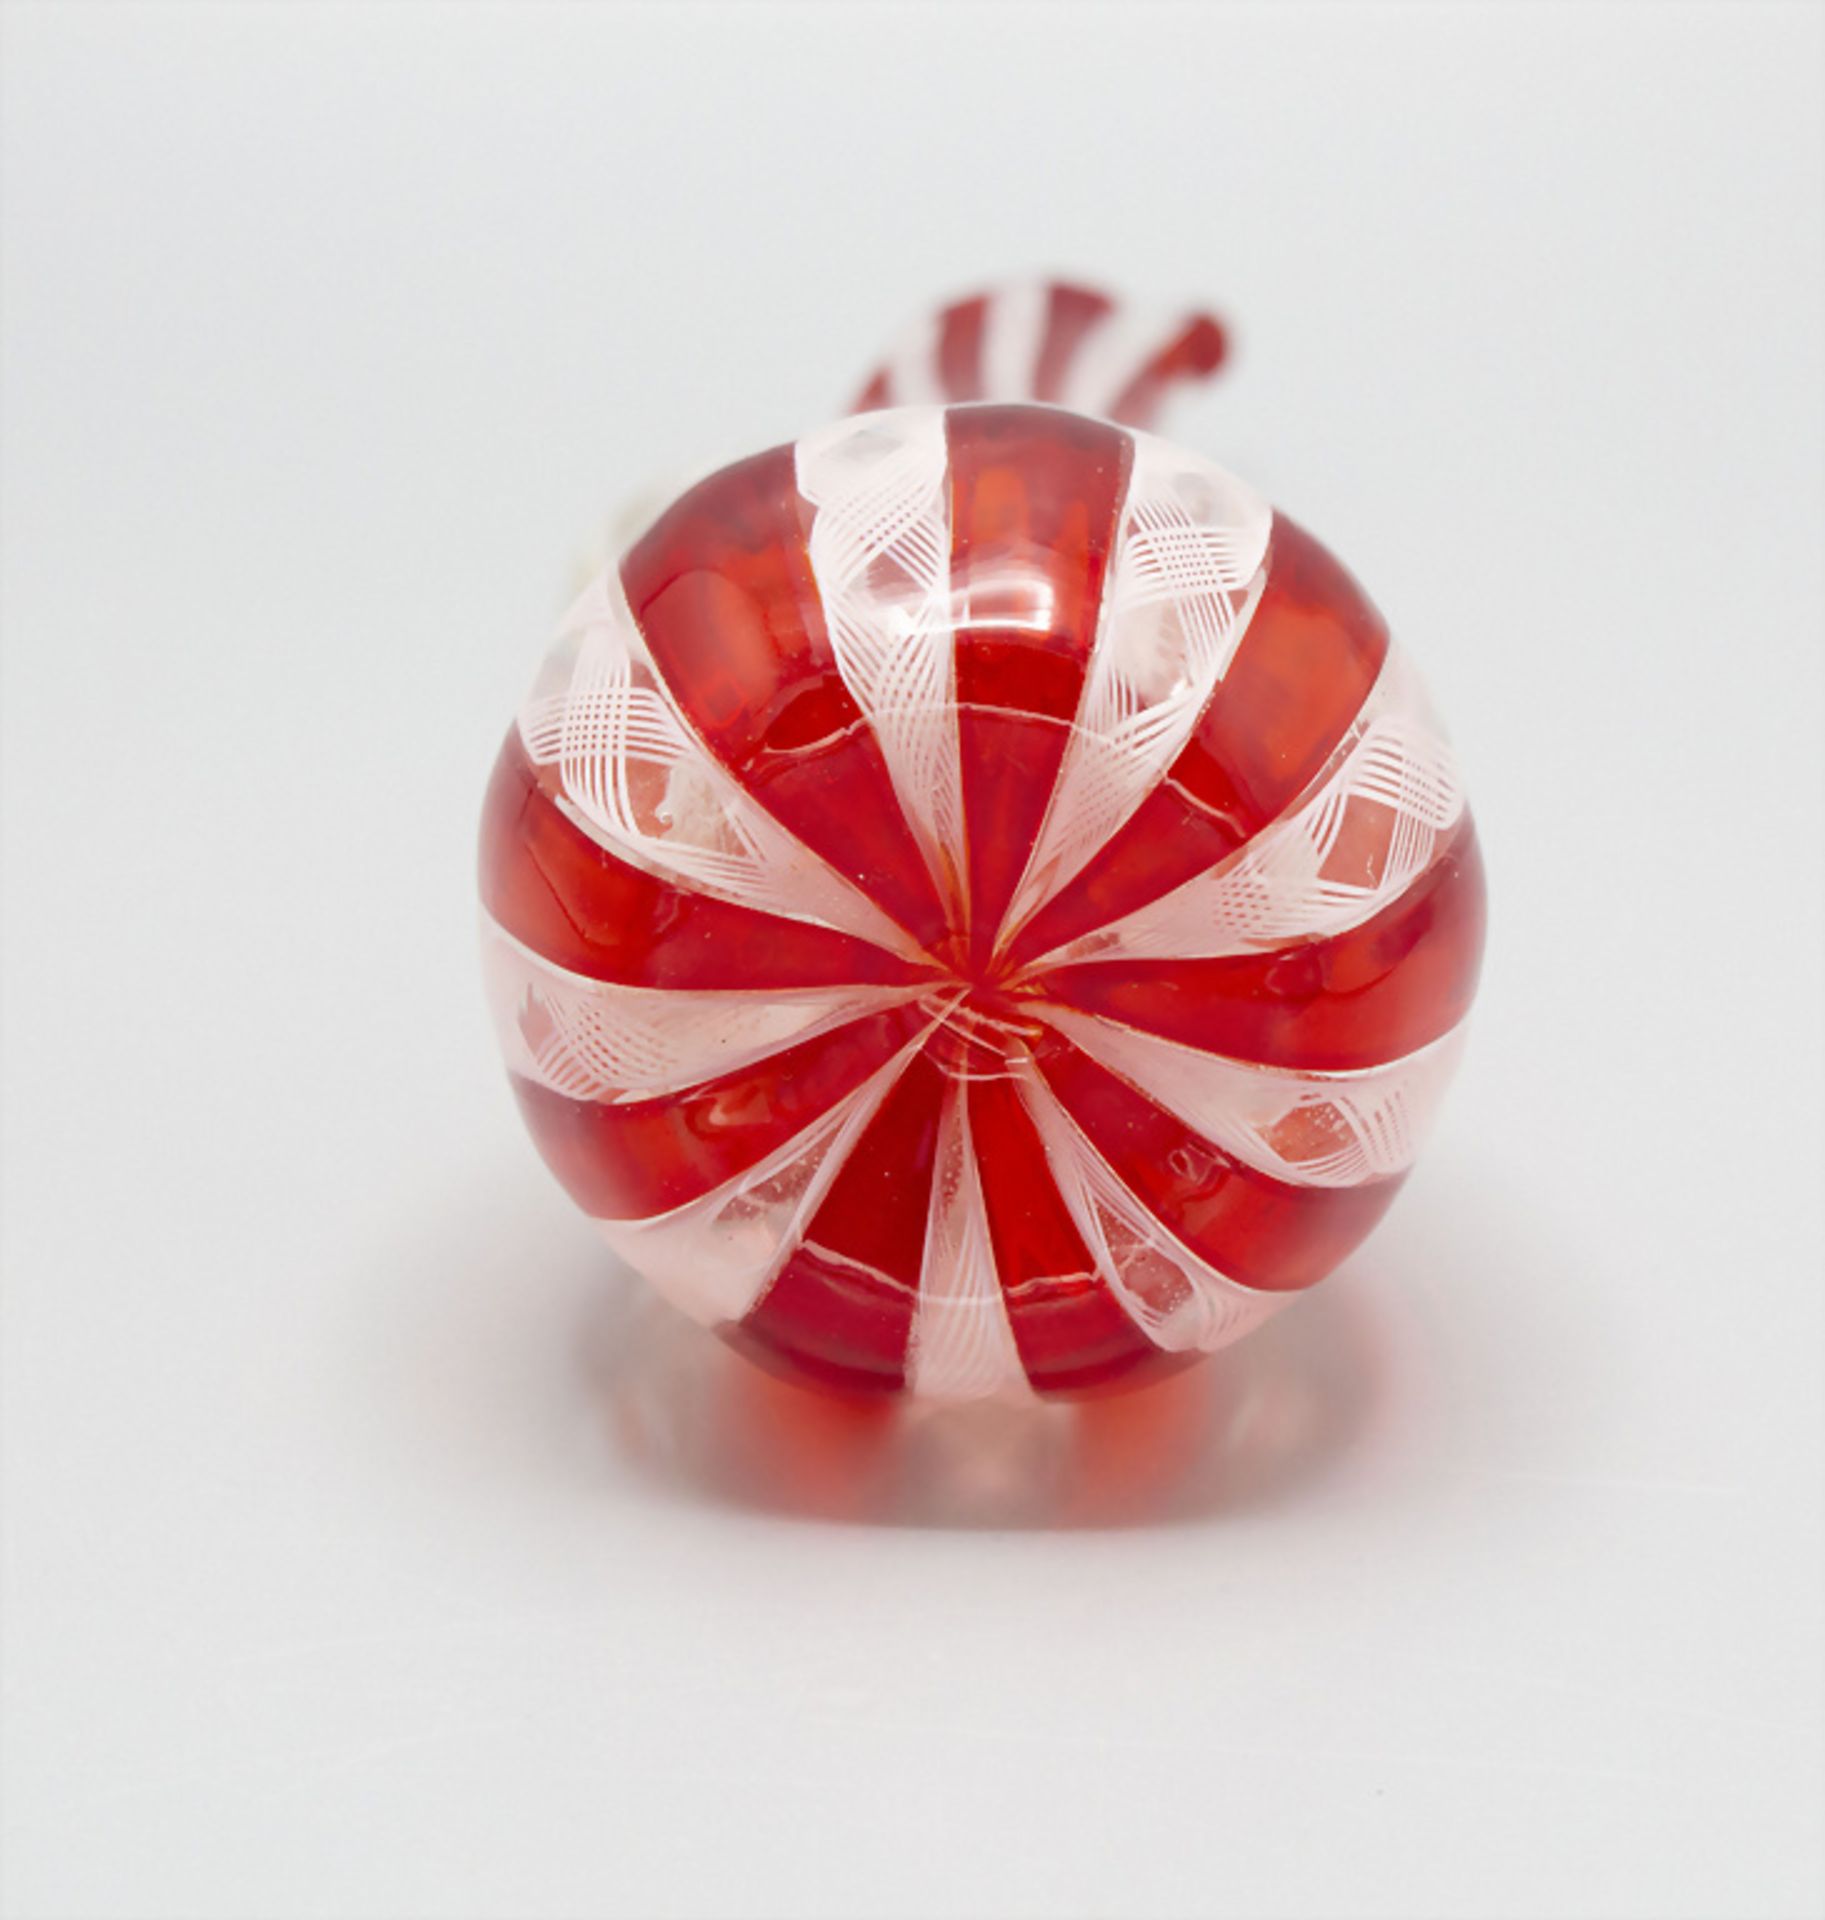 Henkelvase / A glass vase with handle, Murano, Aureljano & Toso, 1. Hälfte 20. Jh. - Image 4 of 5